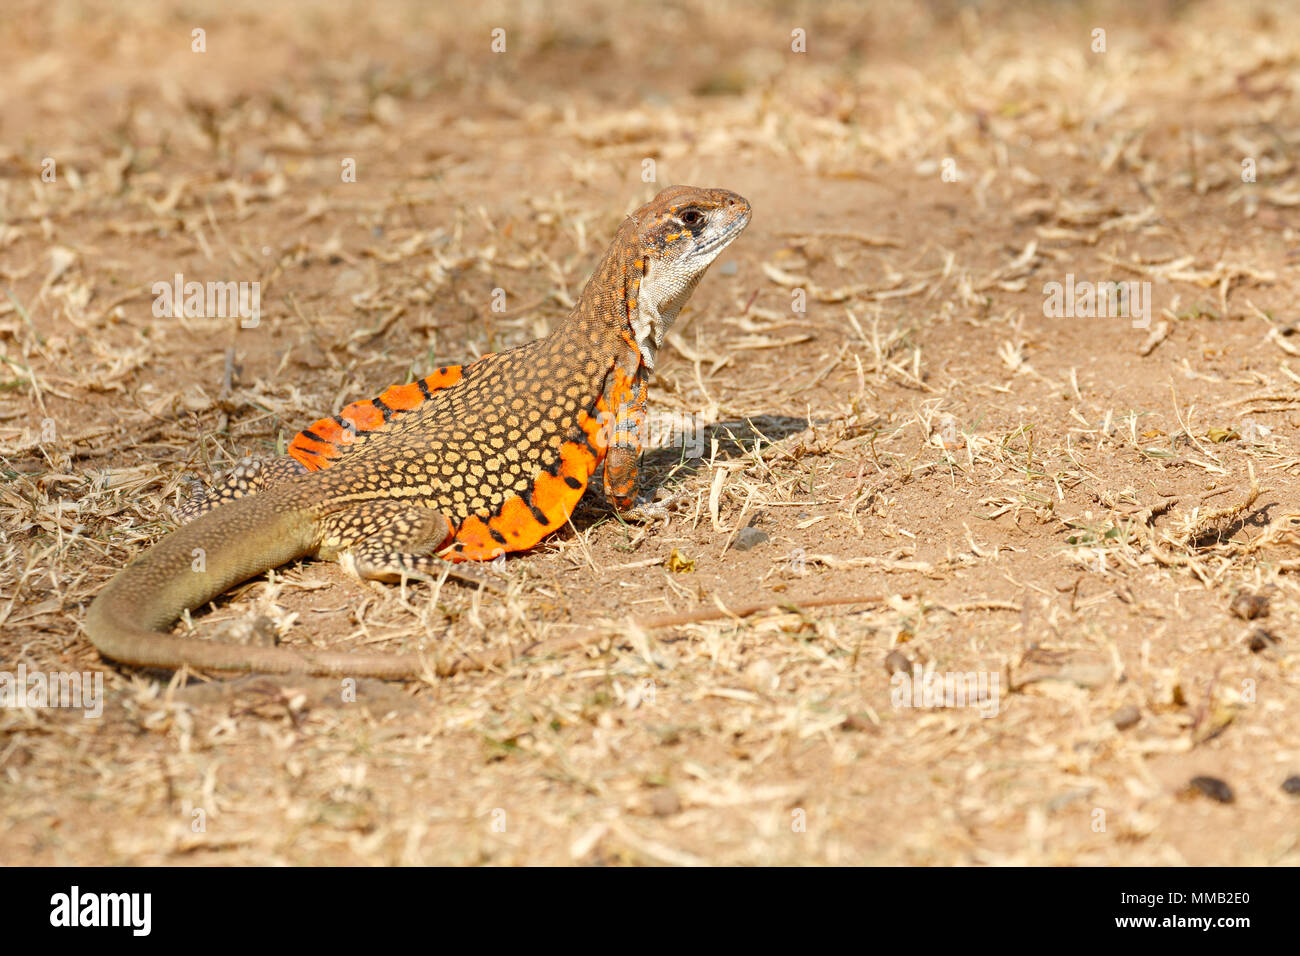 Common butterfly lizard /Butterfly agama (Leiolepis belliana ssp. ocellata) in the nature. Taken from Thailand, Southeast Asia. Stock Photo